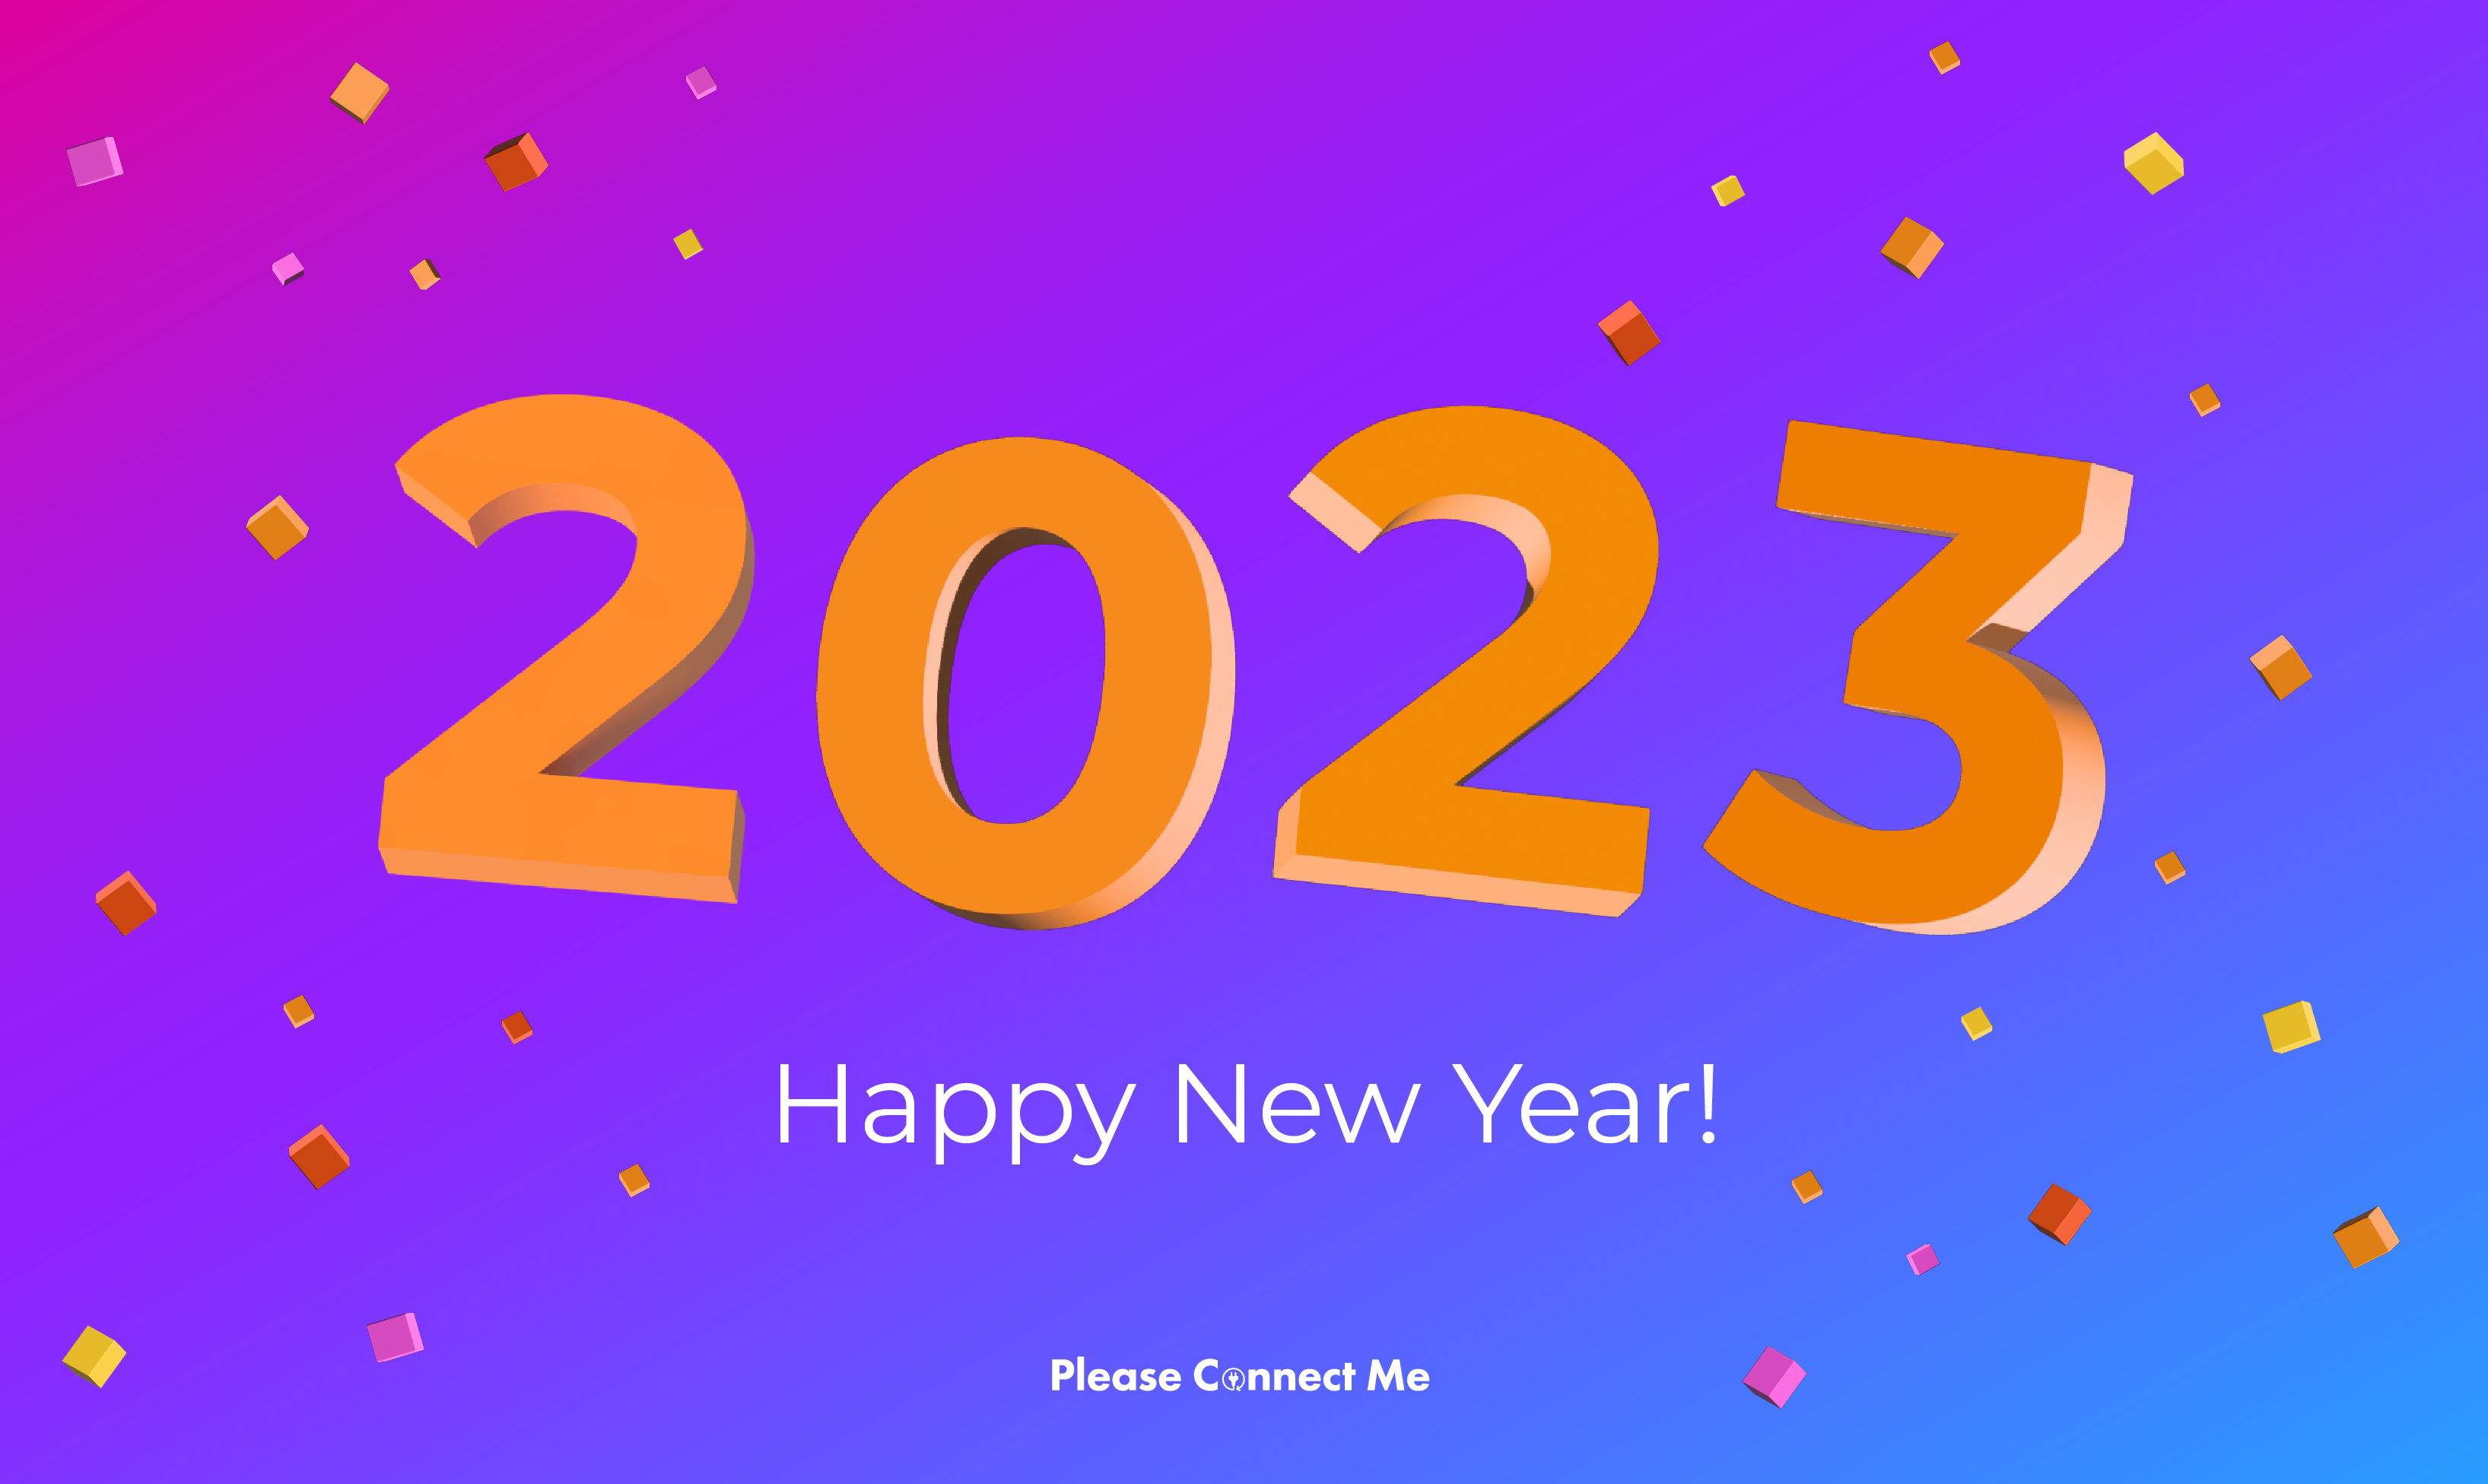 Please Connect Me wishing you a happy new year in 2023